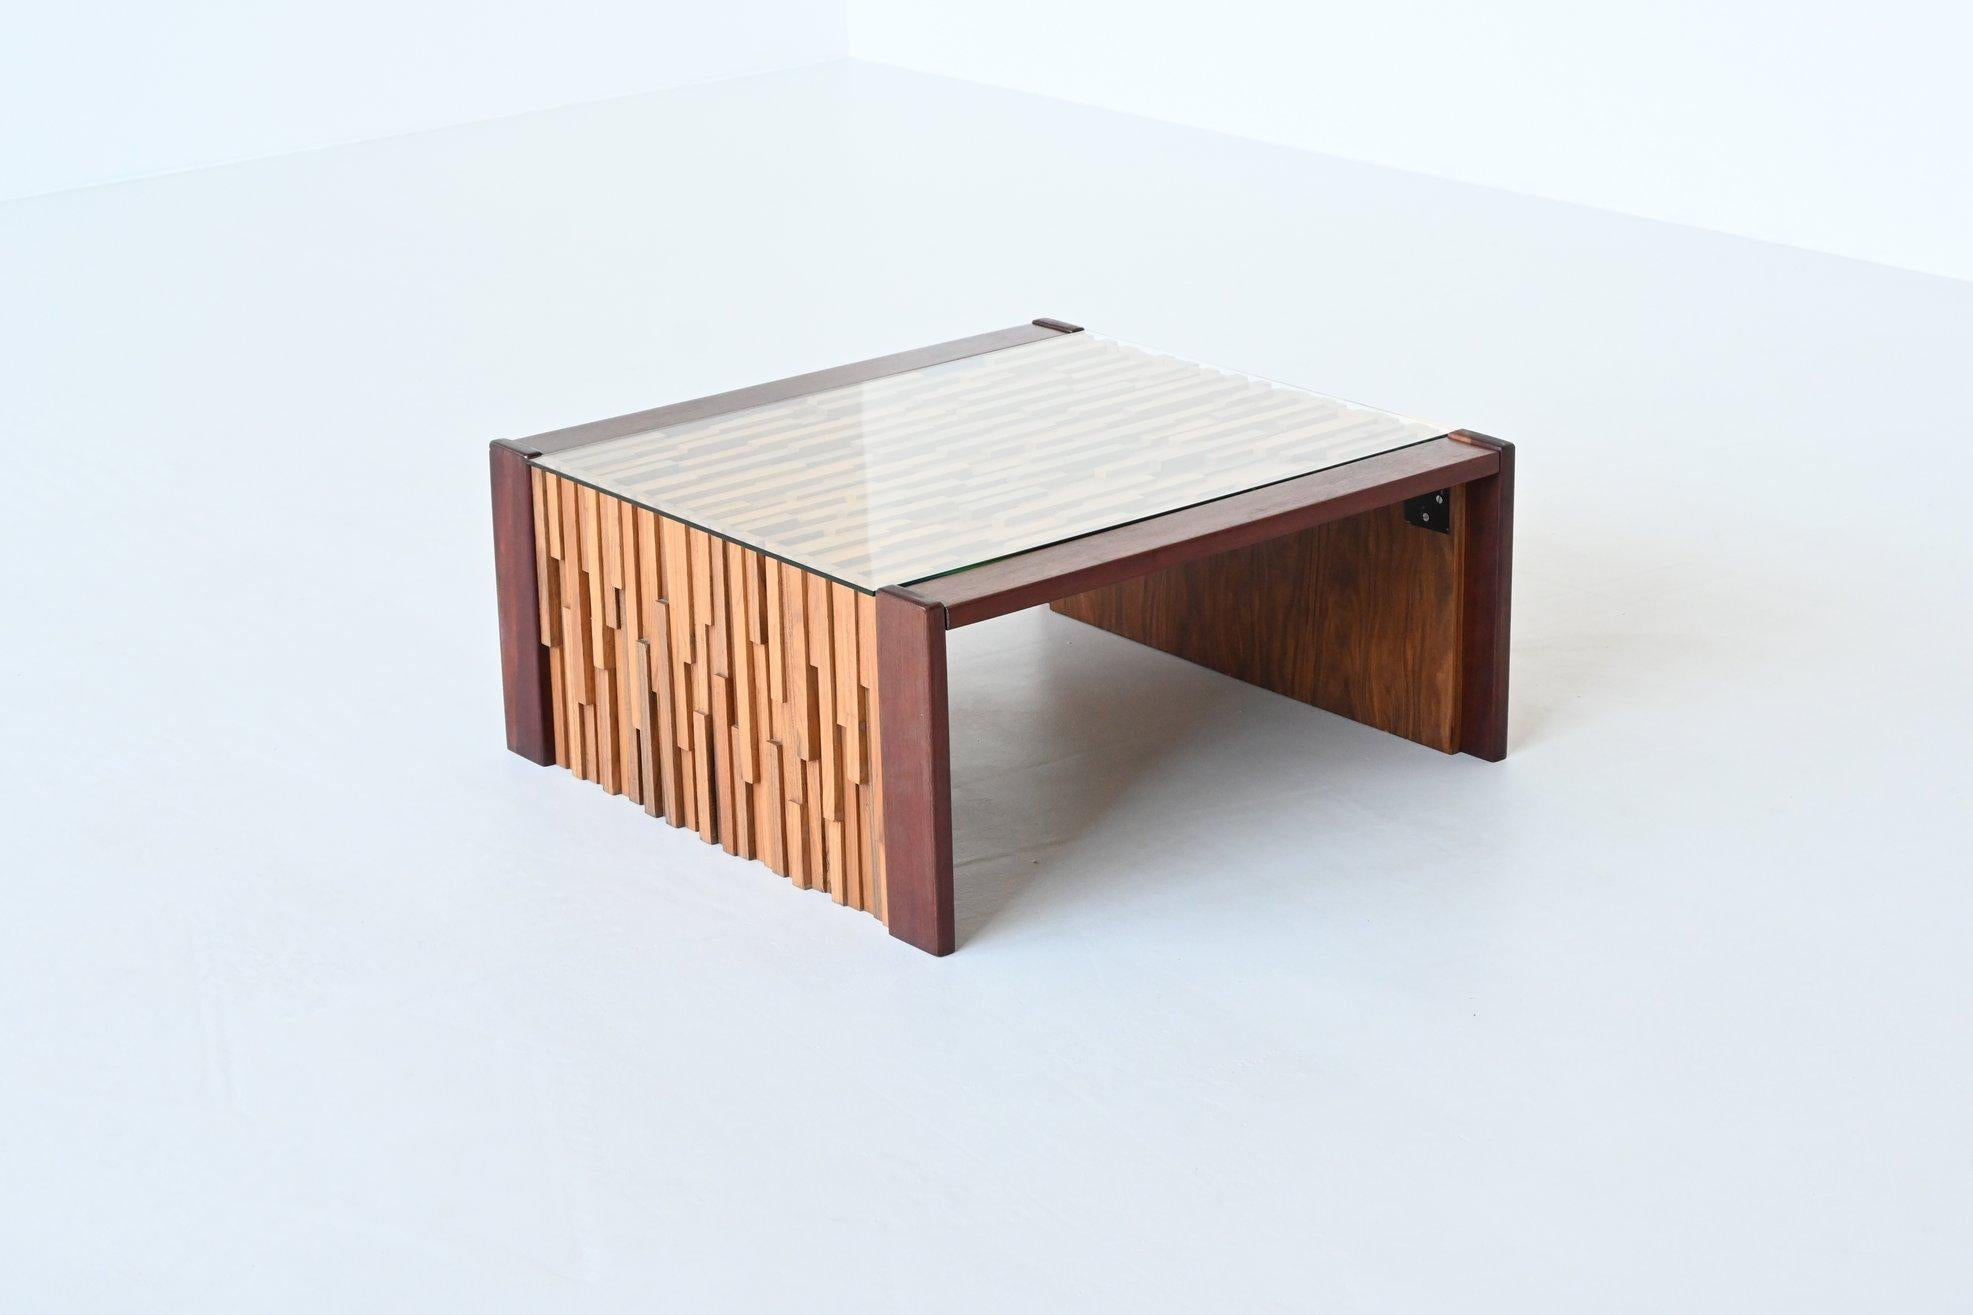 Beautiful sculptural coffee table designed and manufactured by Percival Lafer, Brazil 1960. This amazing piece is made of high quality different tropical hardwood that is very well crafted in different layers. The varying lengths of exotic wood